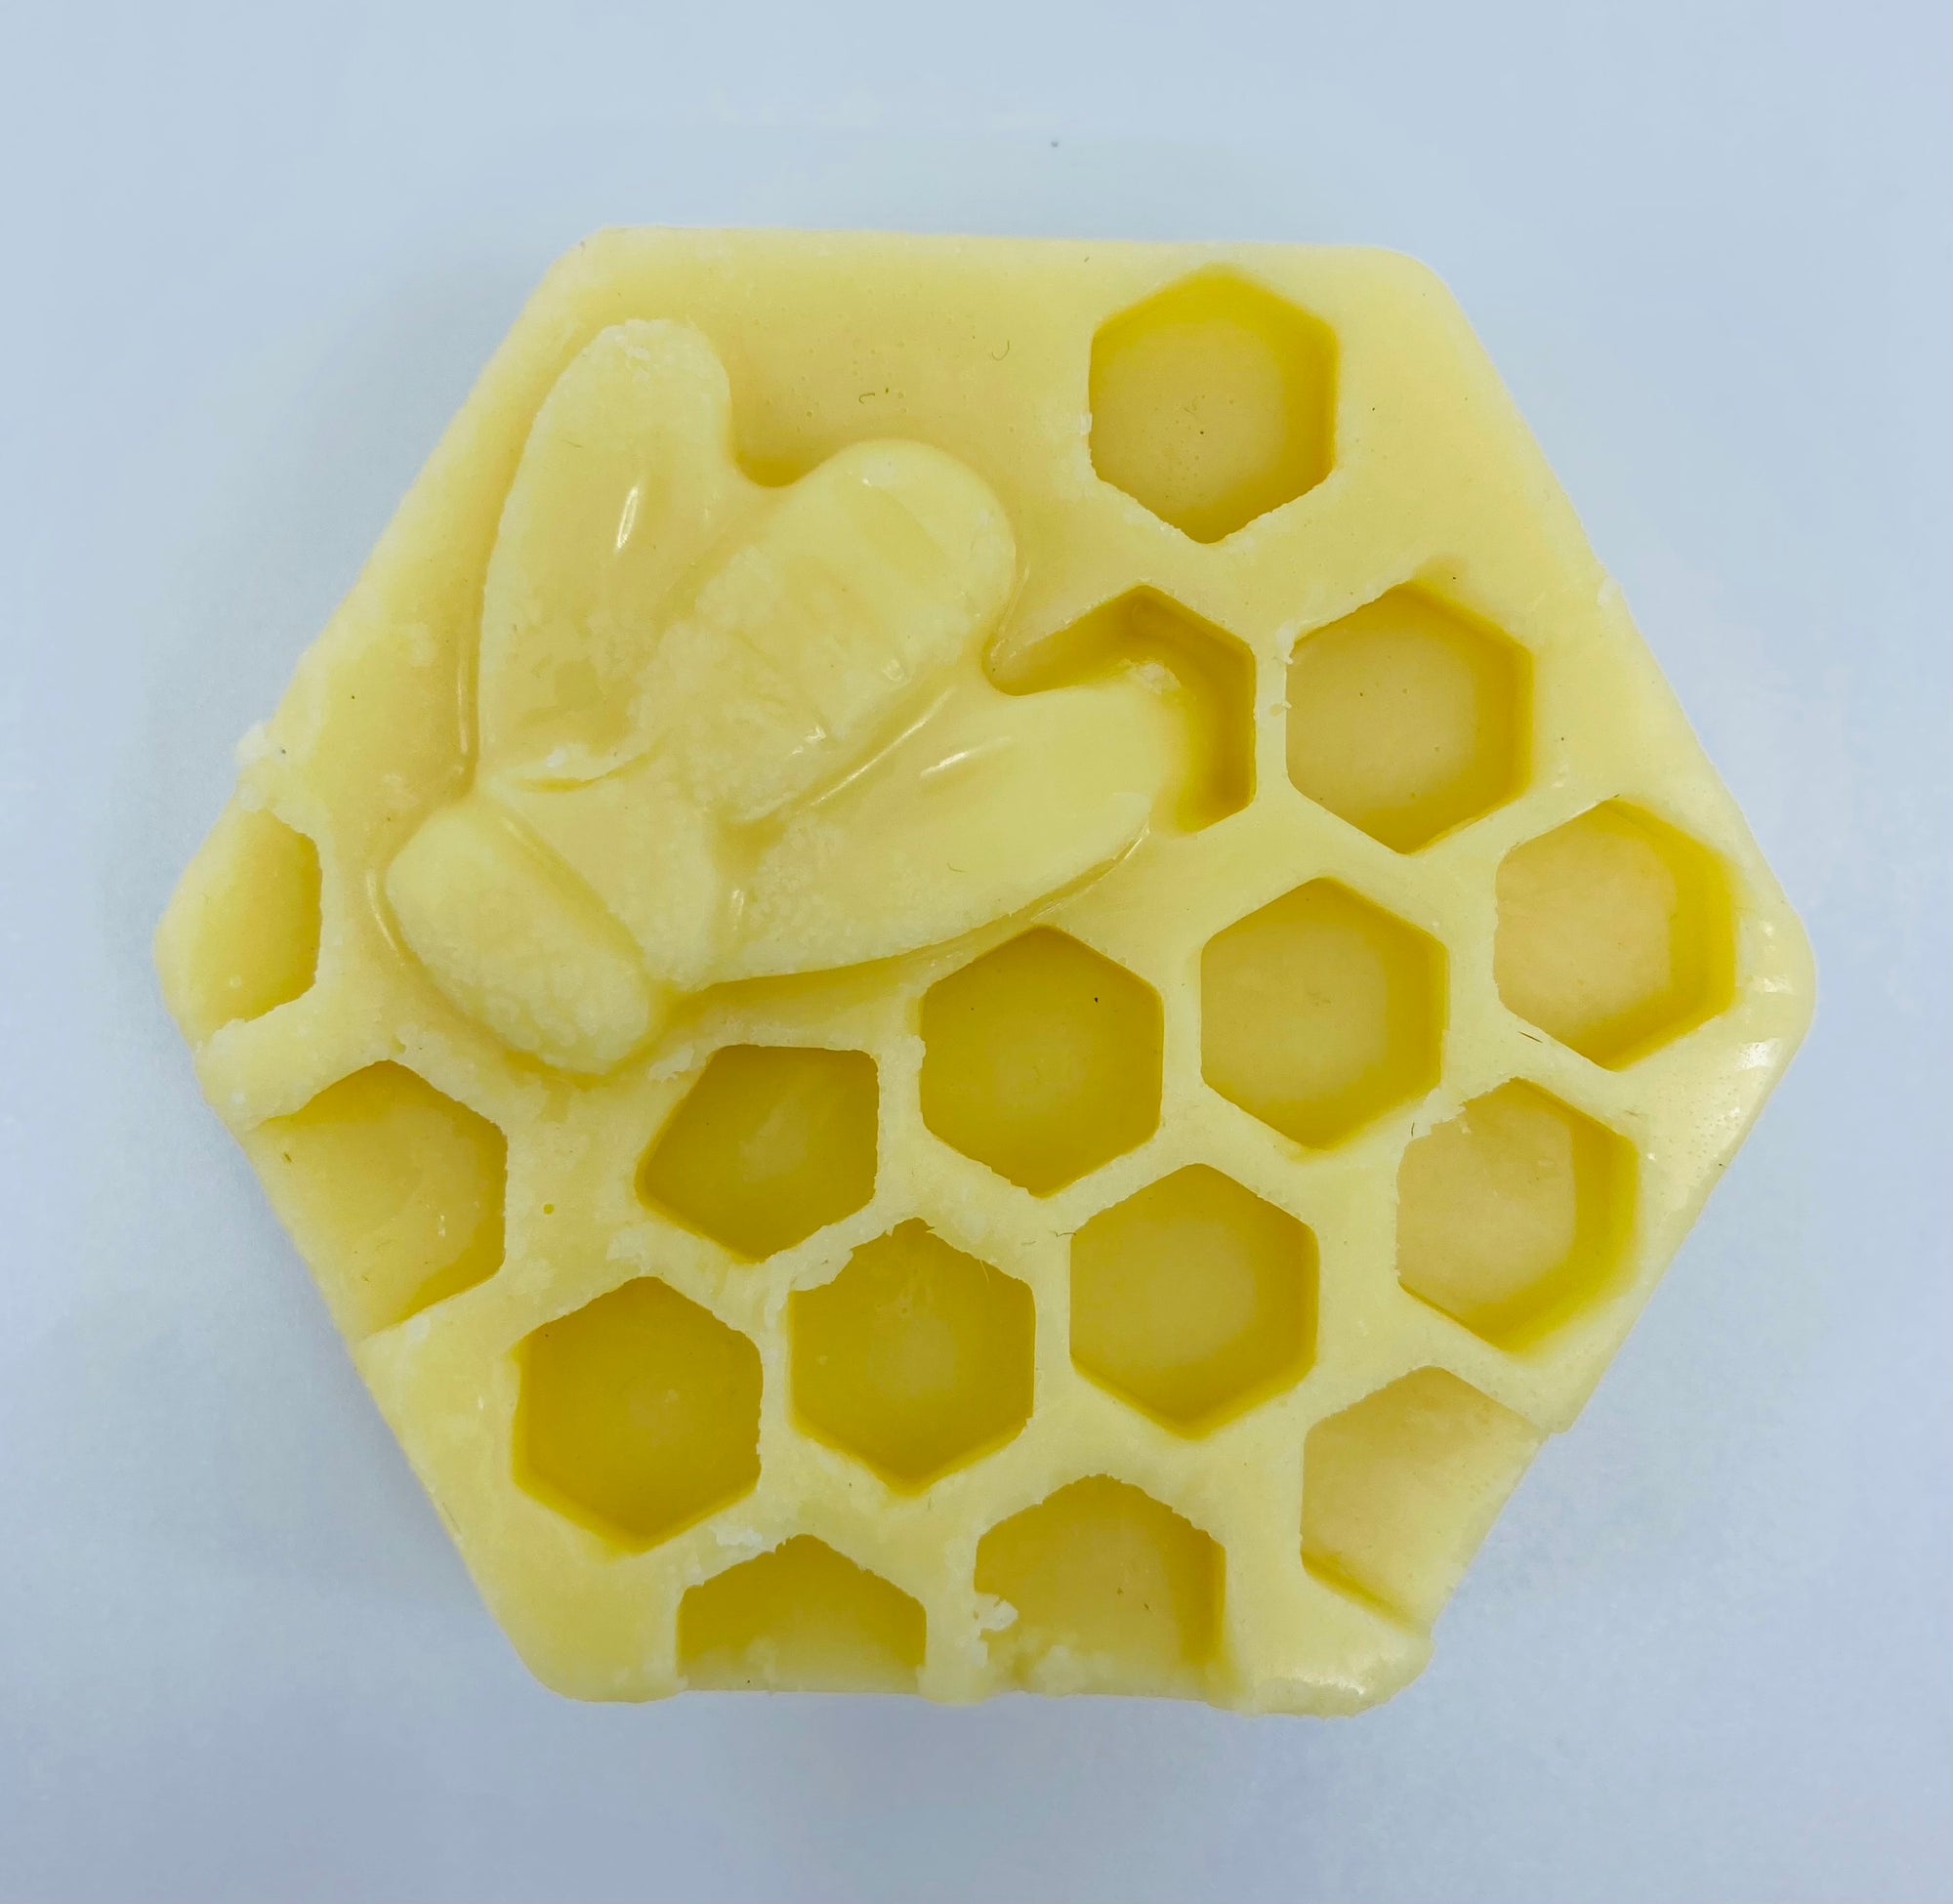 100% natural lotion bar suitable for all skin types in the shape of a honey comb with a bee on it.  Please note that beeswax is a natural resource and there may be variations in color from pale yellow to dark gold.